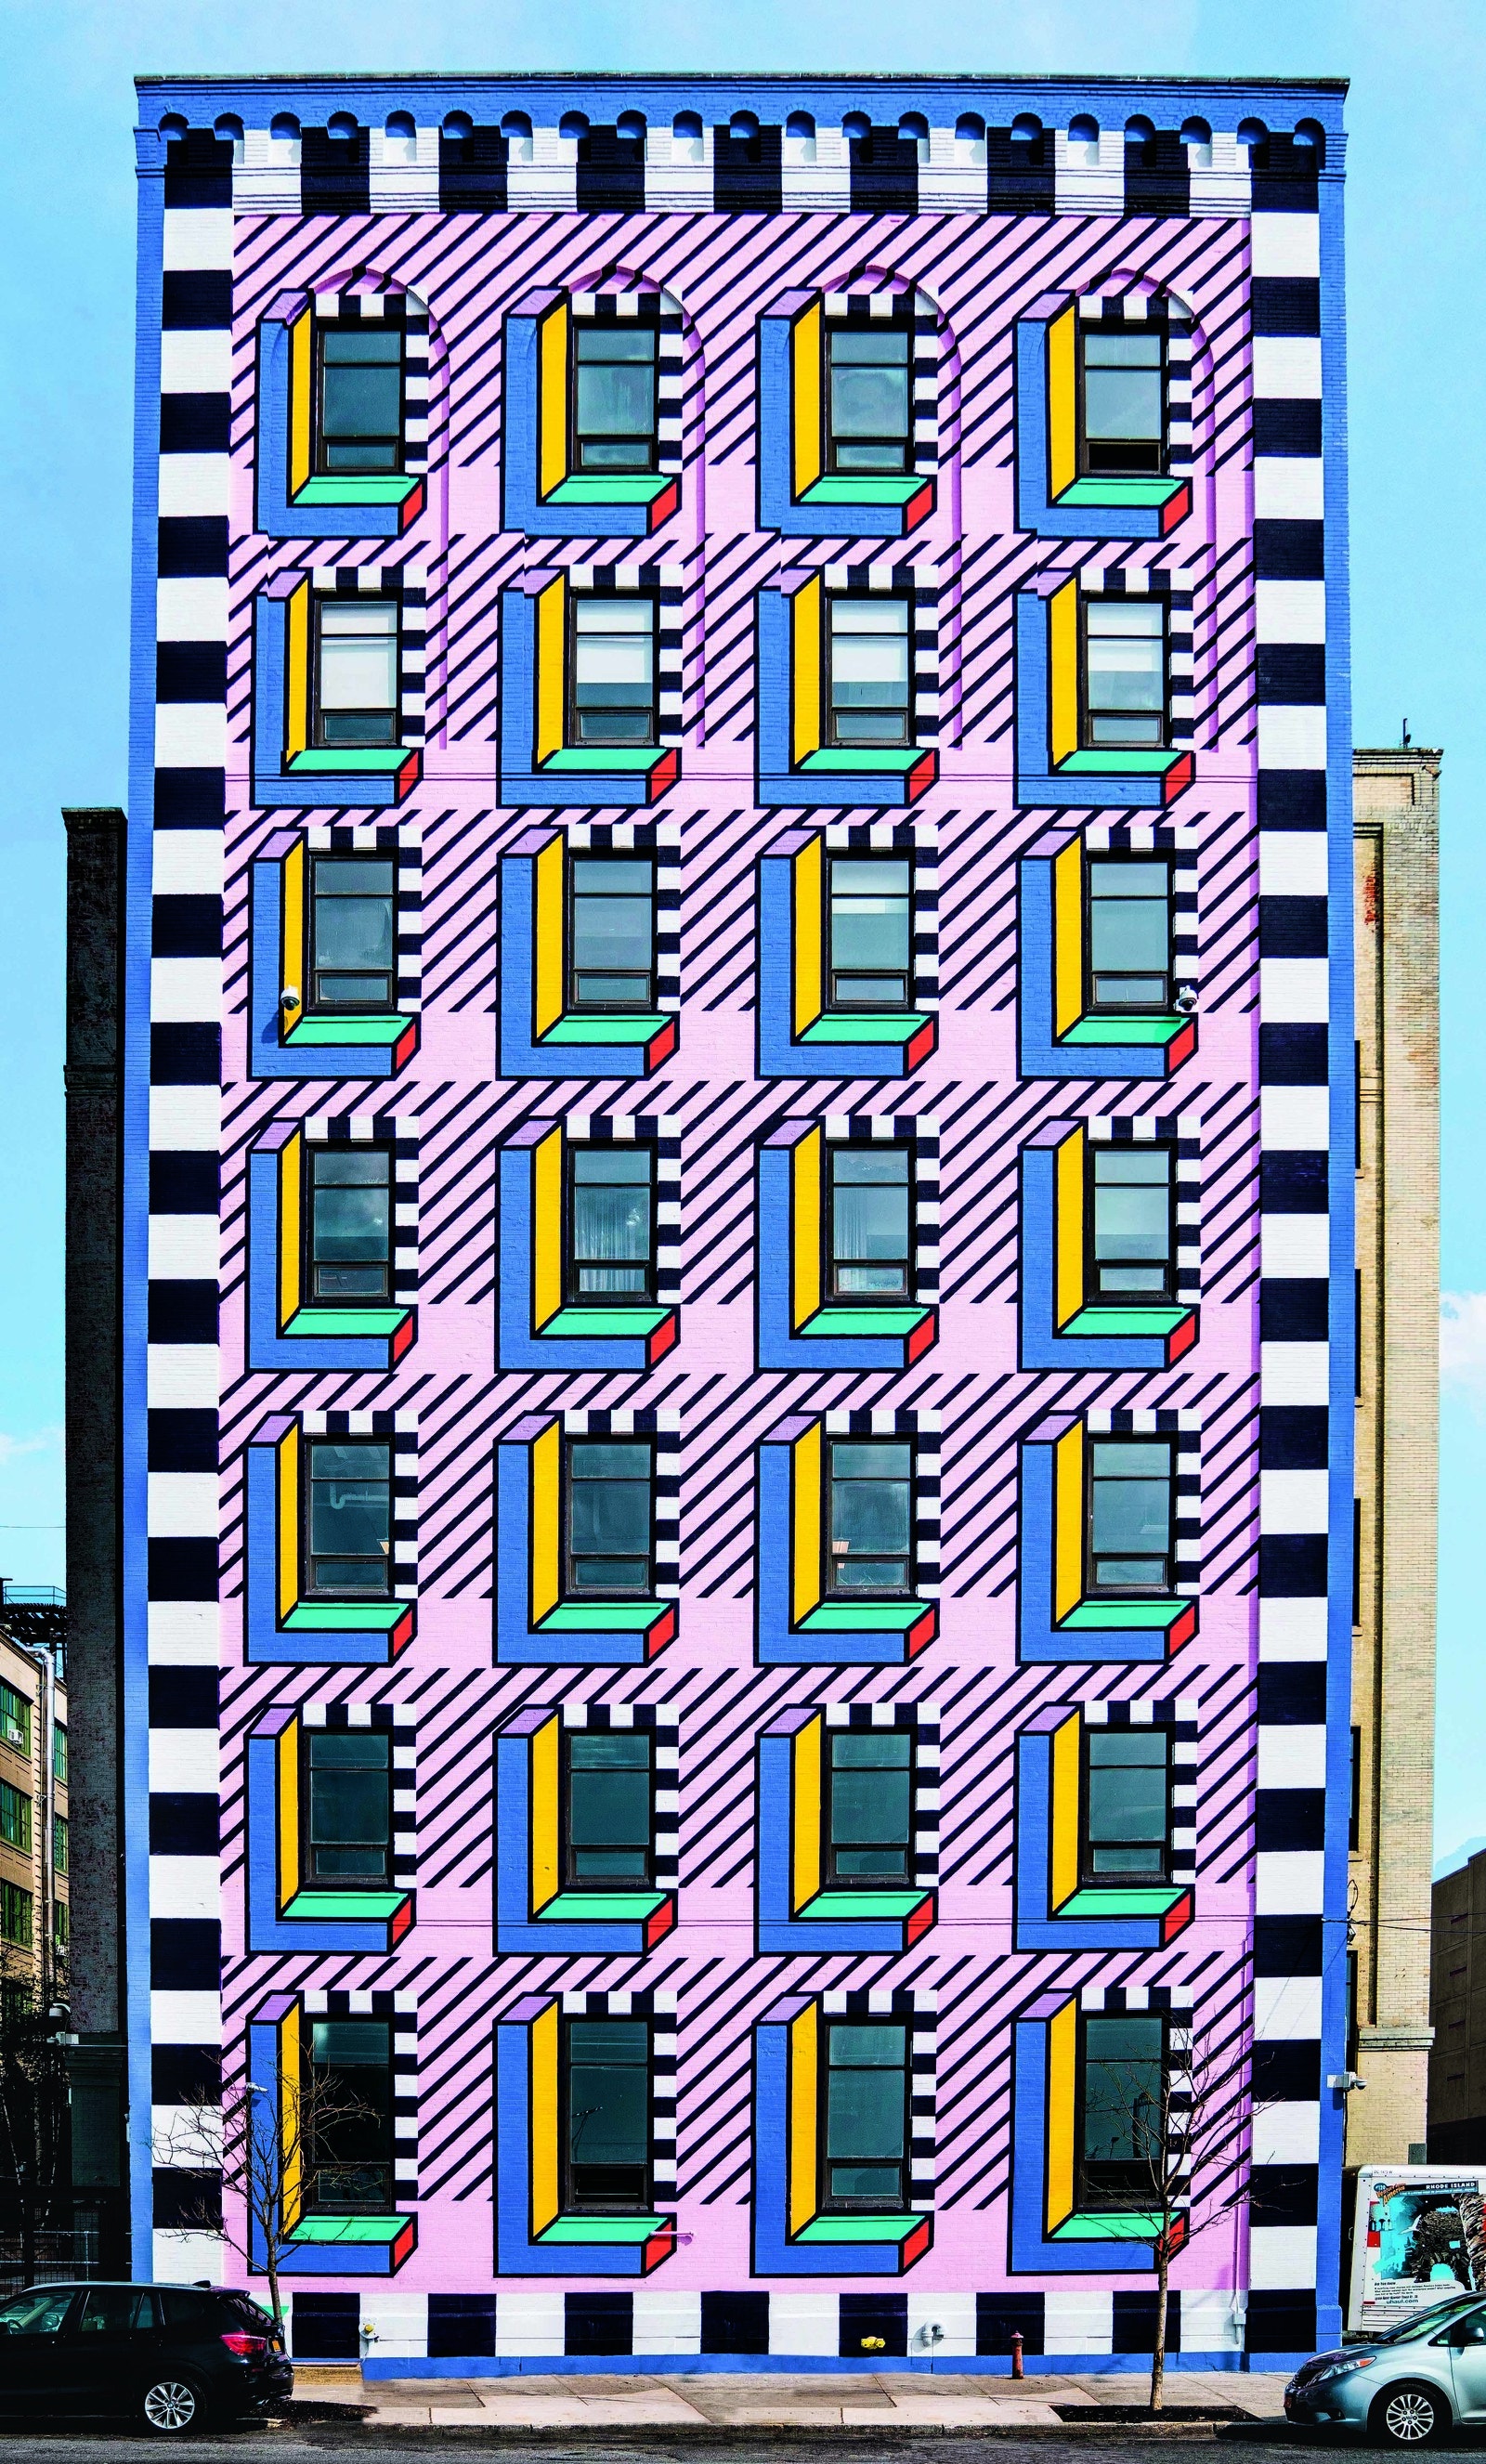 a tall skinny building with colorful tiles